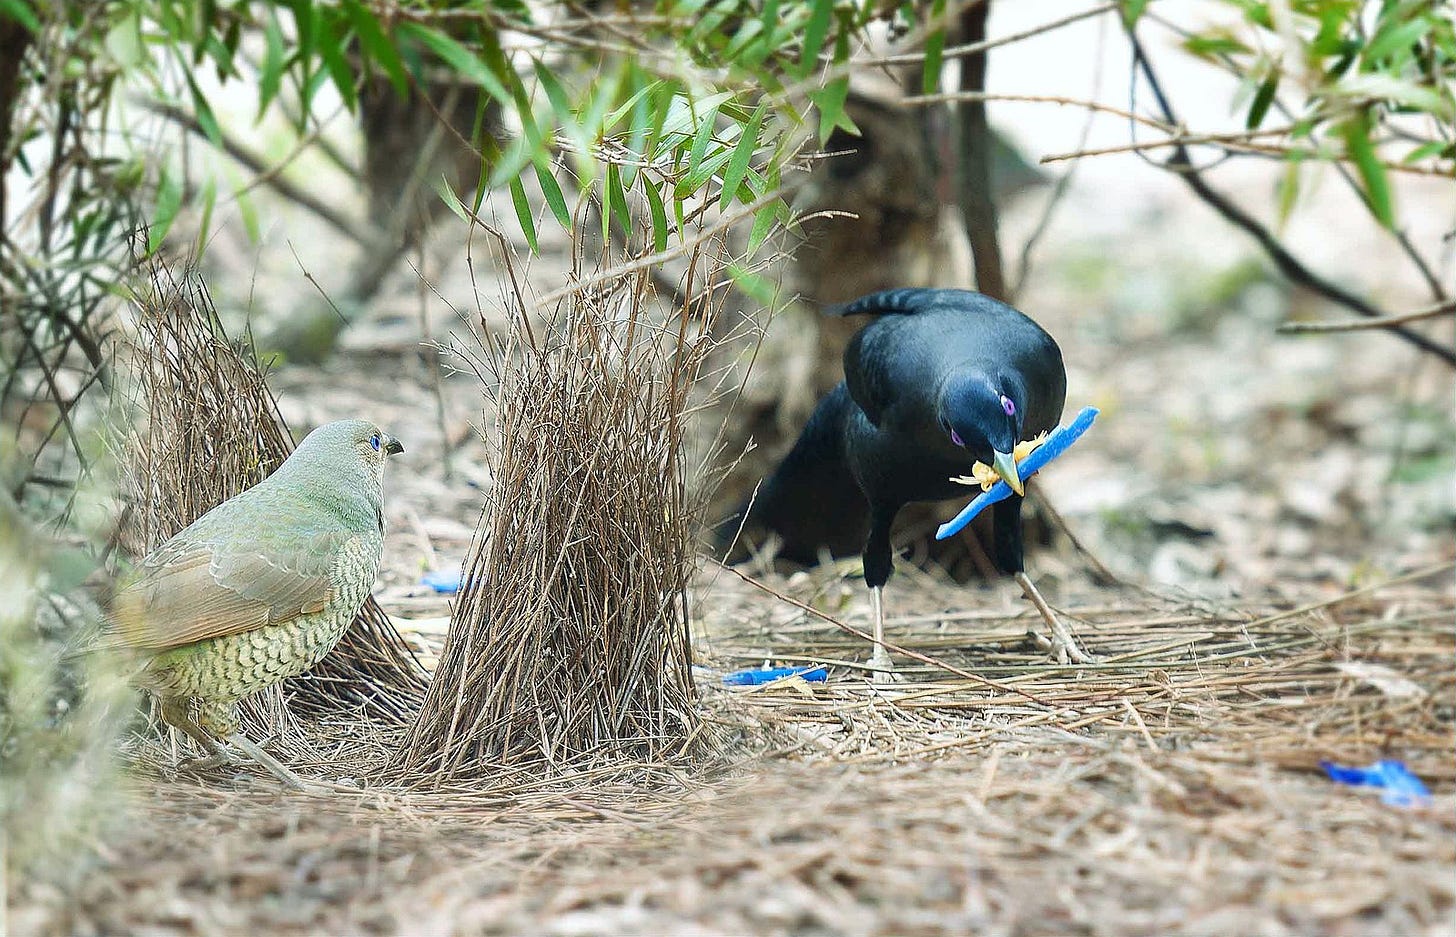 Satin_Bowerbird,_adult_and_immature_males,_Canberra_(6126773690).jpg